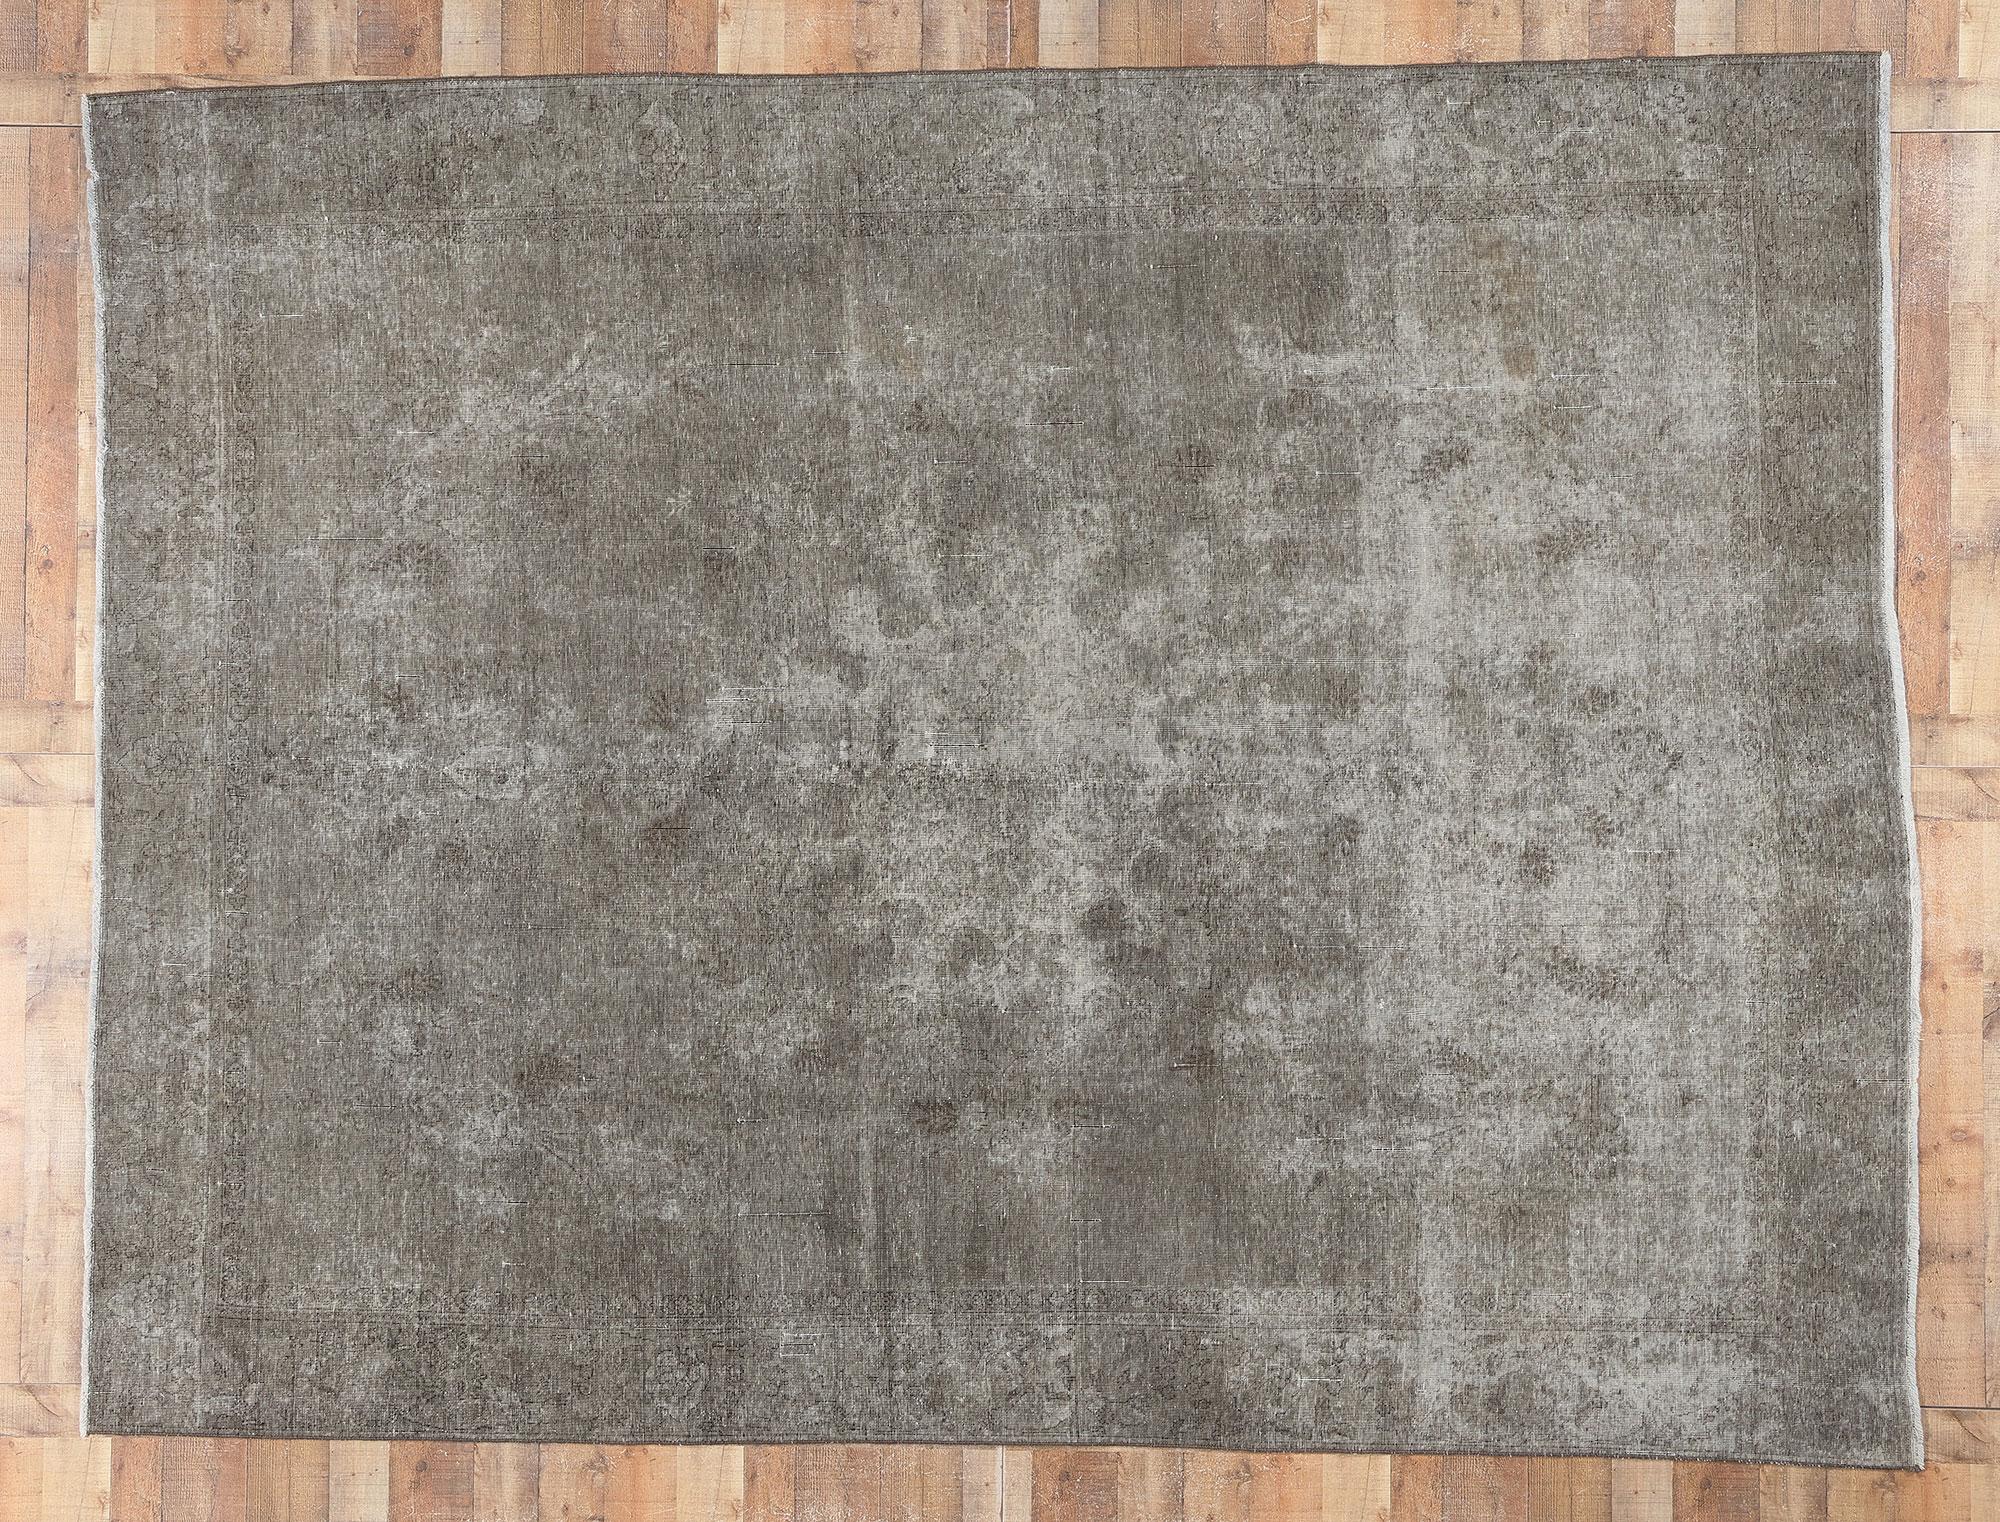 78592 Distressed Vintage Persian Overdyed Rug, 08'09 x 11'04. 
?Luxe utilitarian appeal meets sophisticated elegance in this vintage Persian overdyed rug. The modern industrial charm and monochromatic earthy colorway woven into this piece work